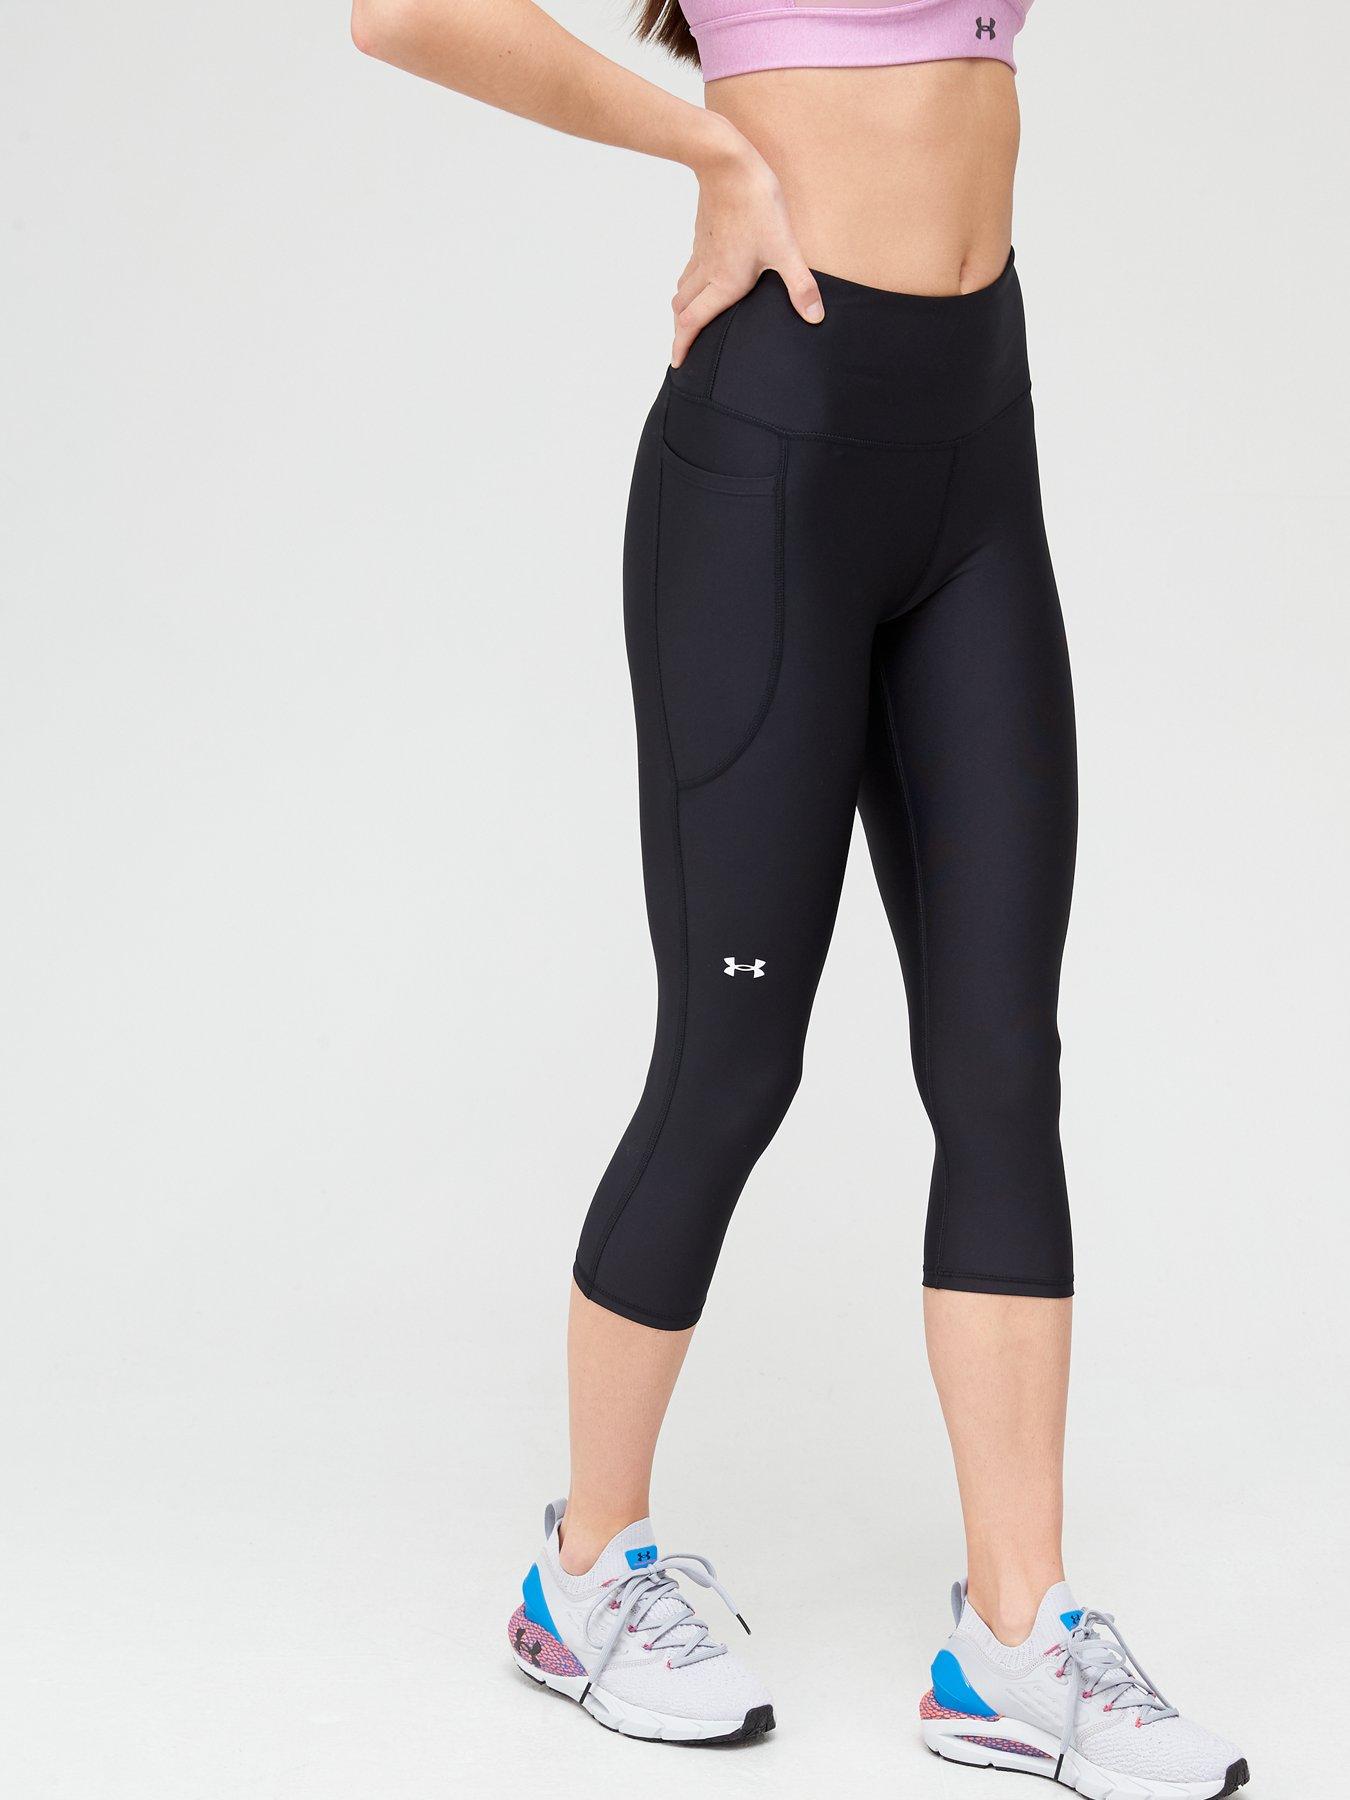 Latest Offers, Tights & leggings, Womens sports clothing, Sports &  leisure